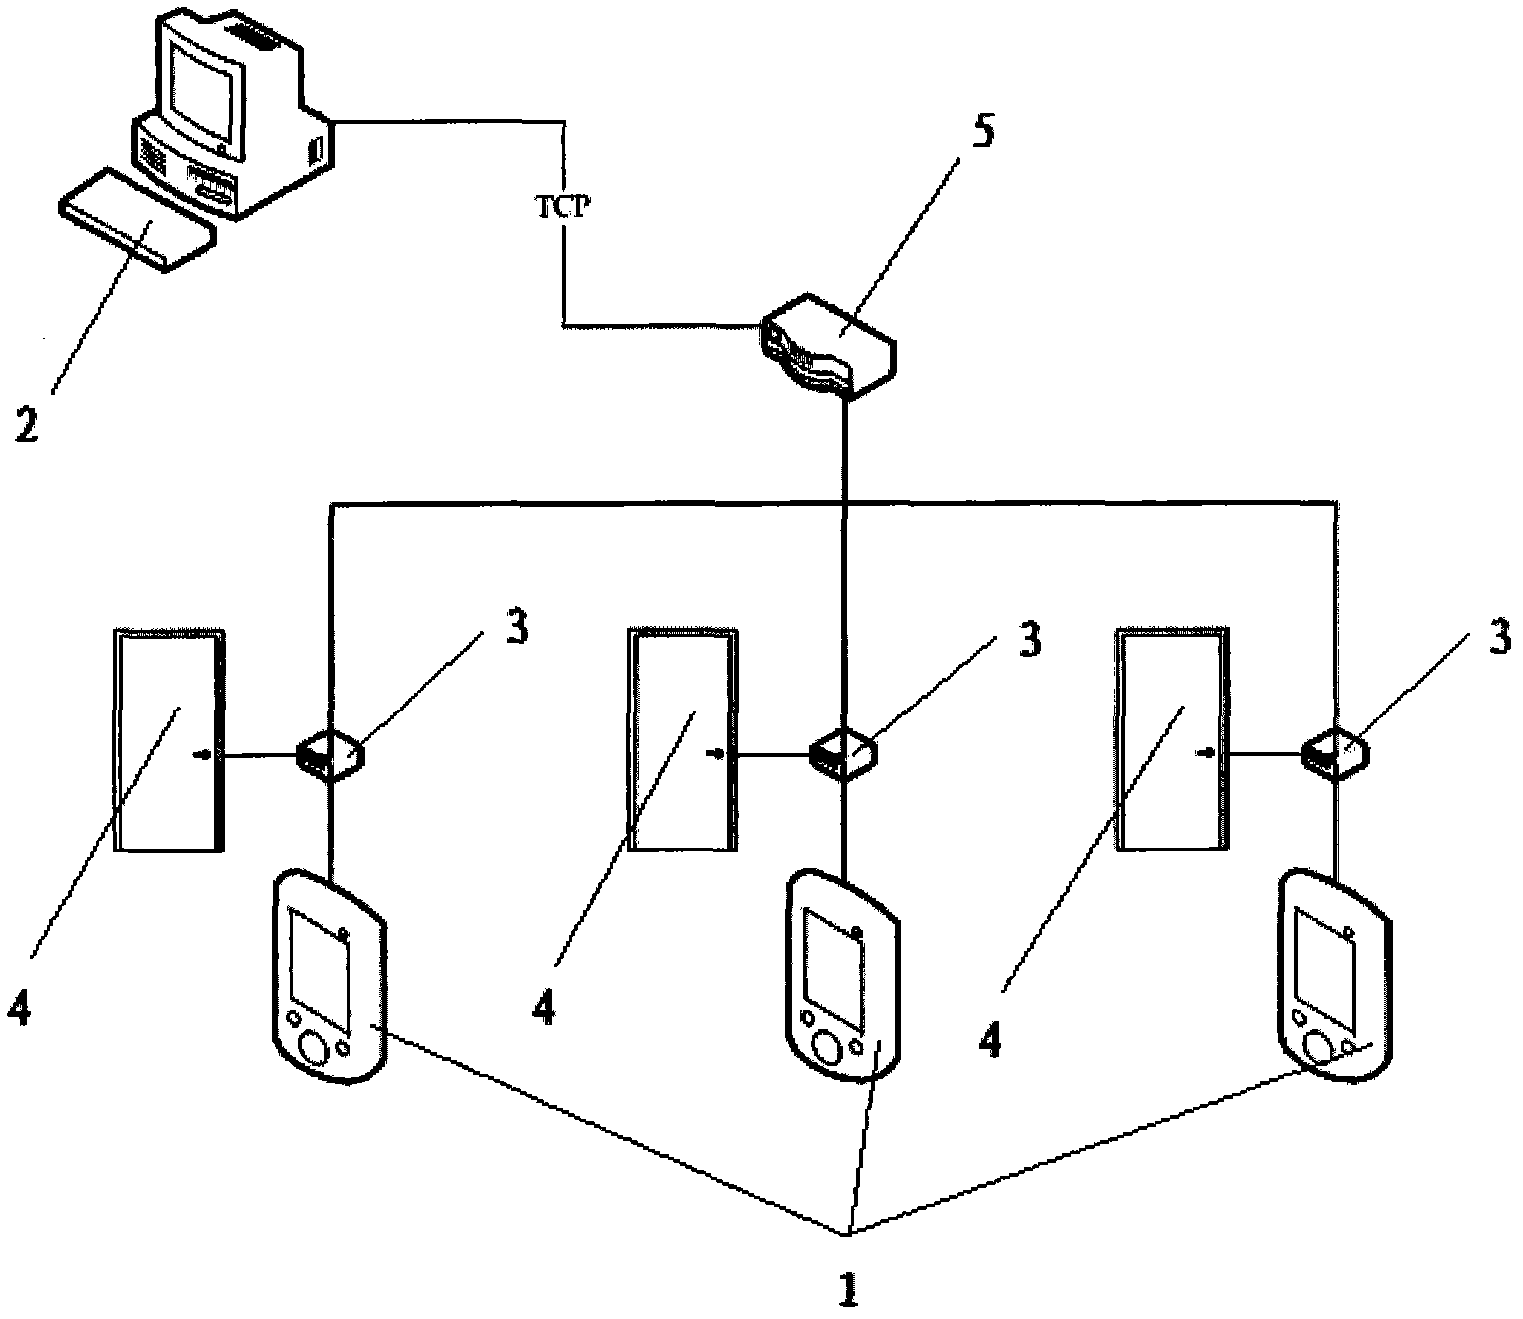 Access control system based on palm vein authentication and authentication method using same